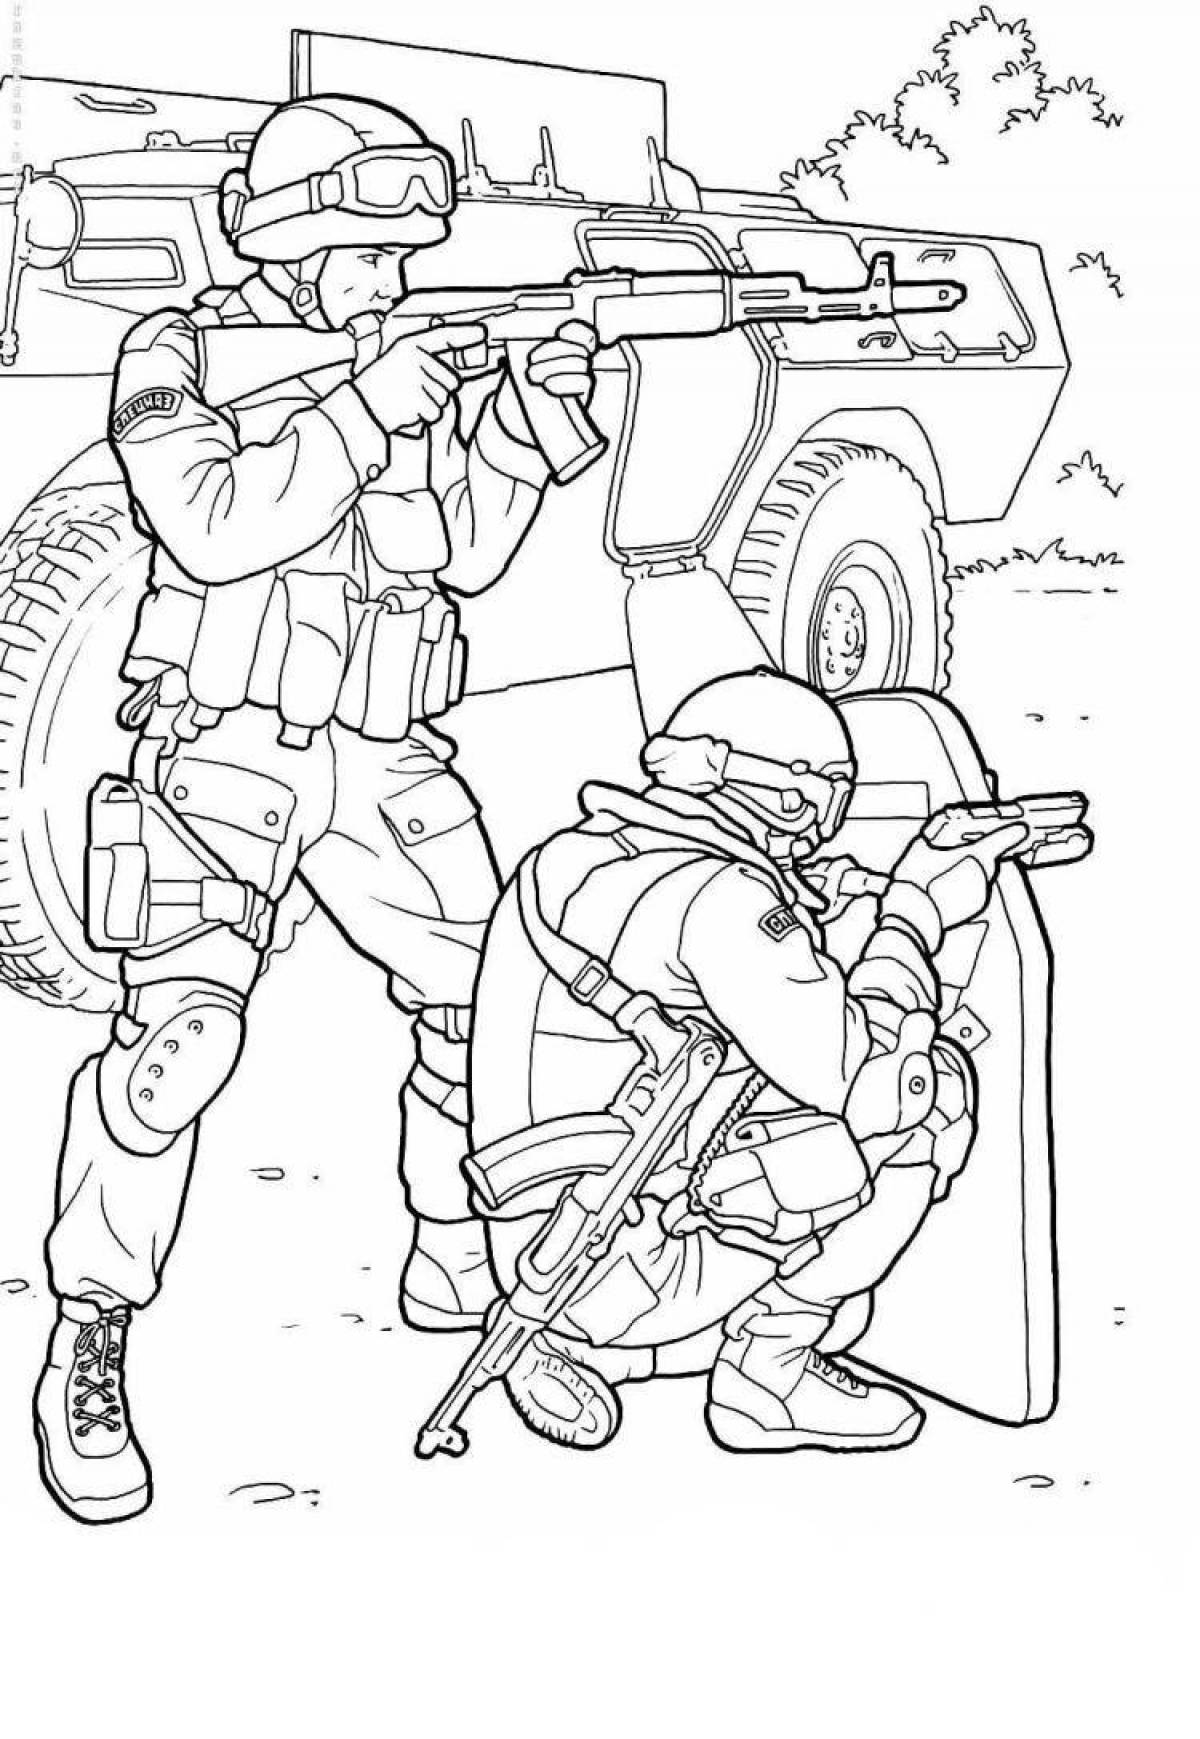 Coloring page with riot gas